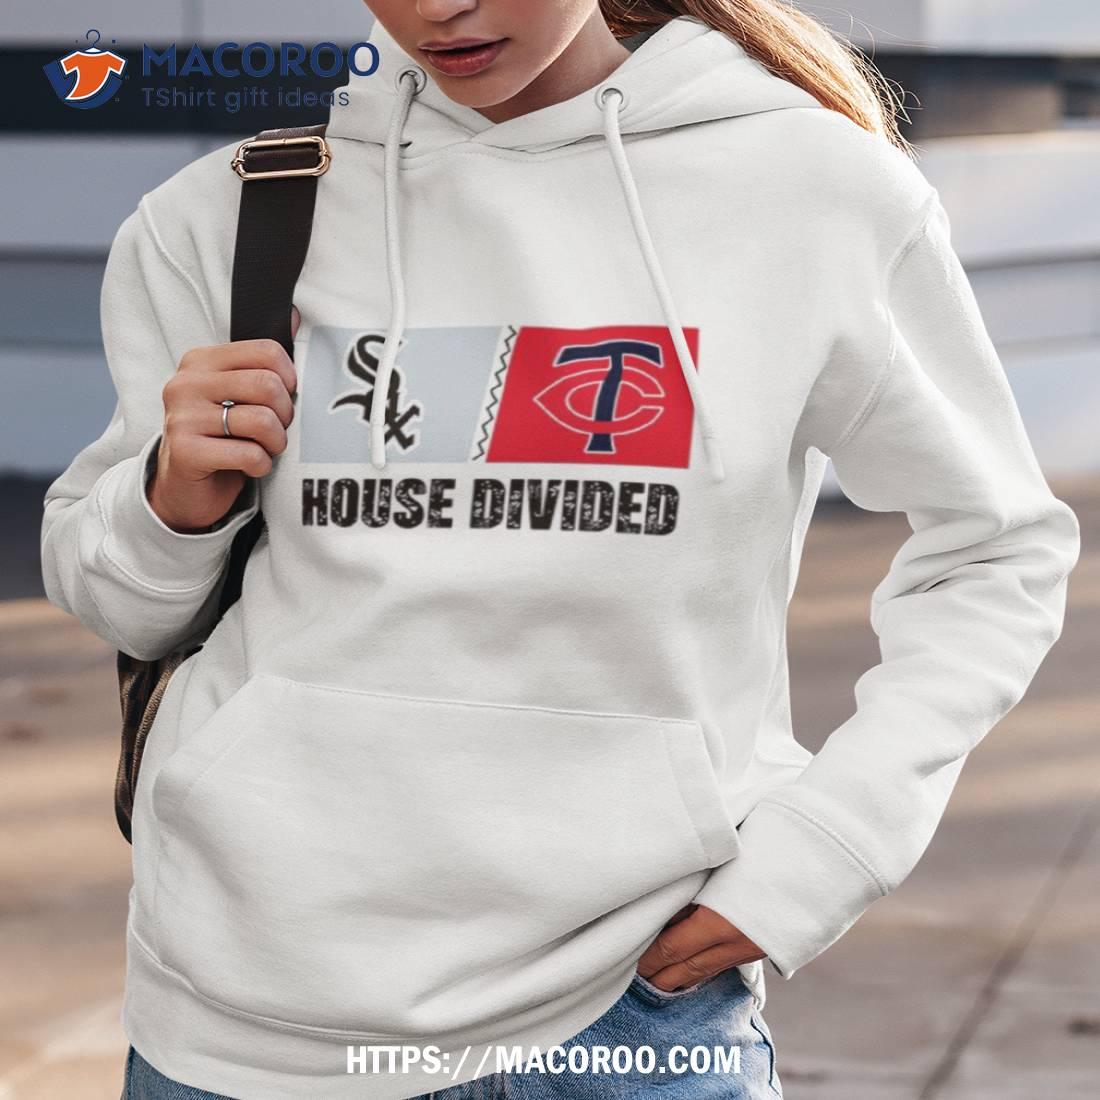 A House Divided -Boutique & Gifts